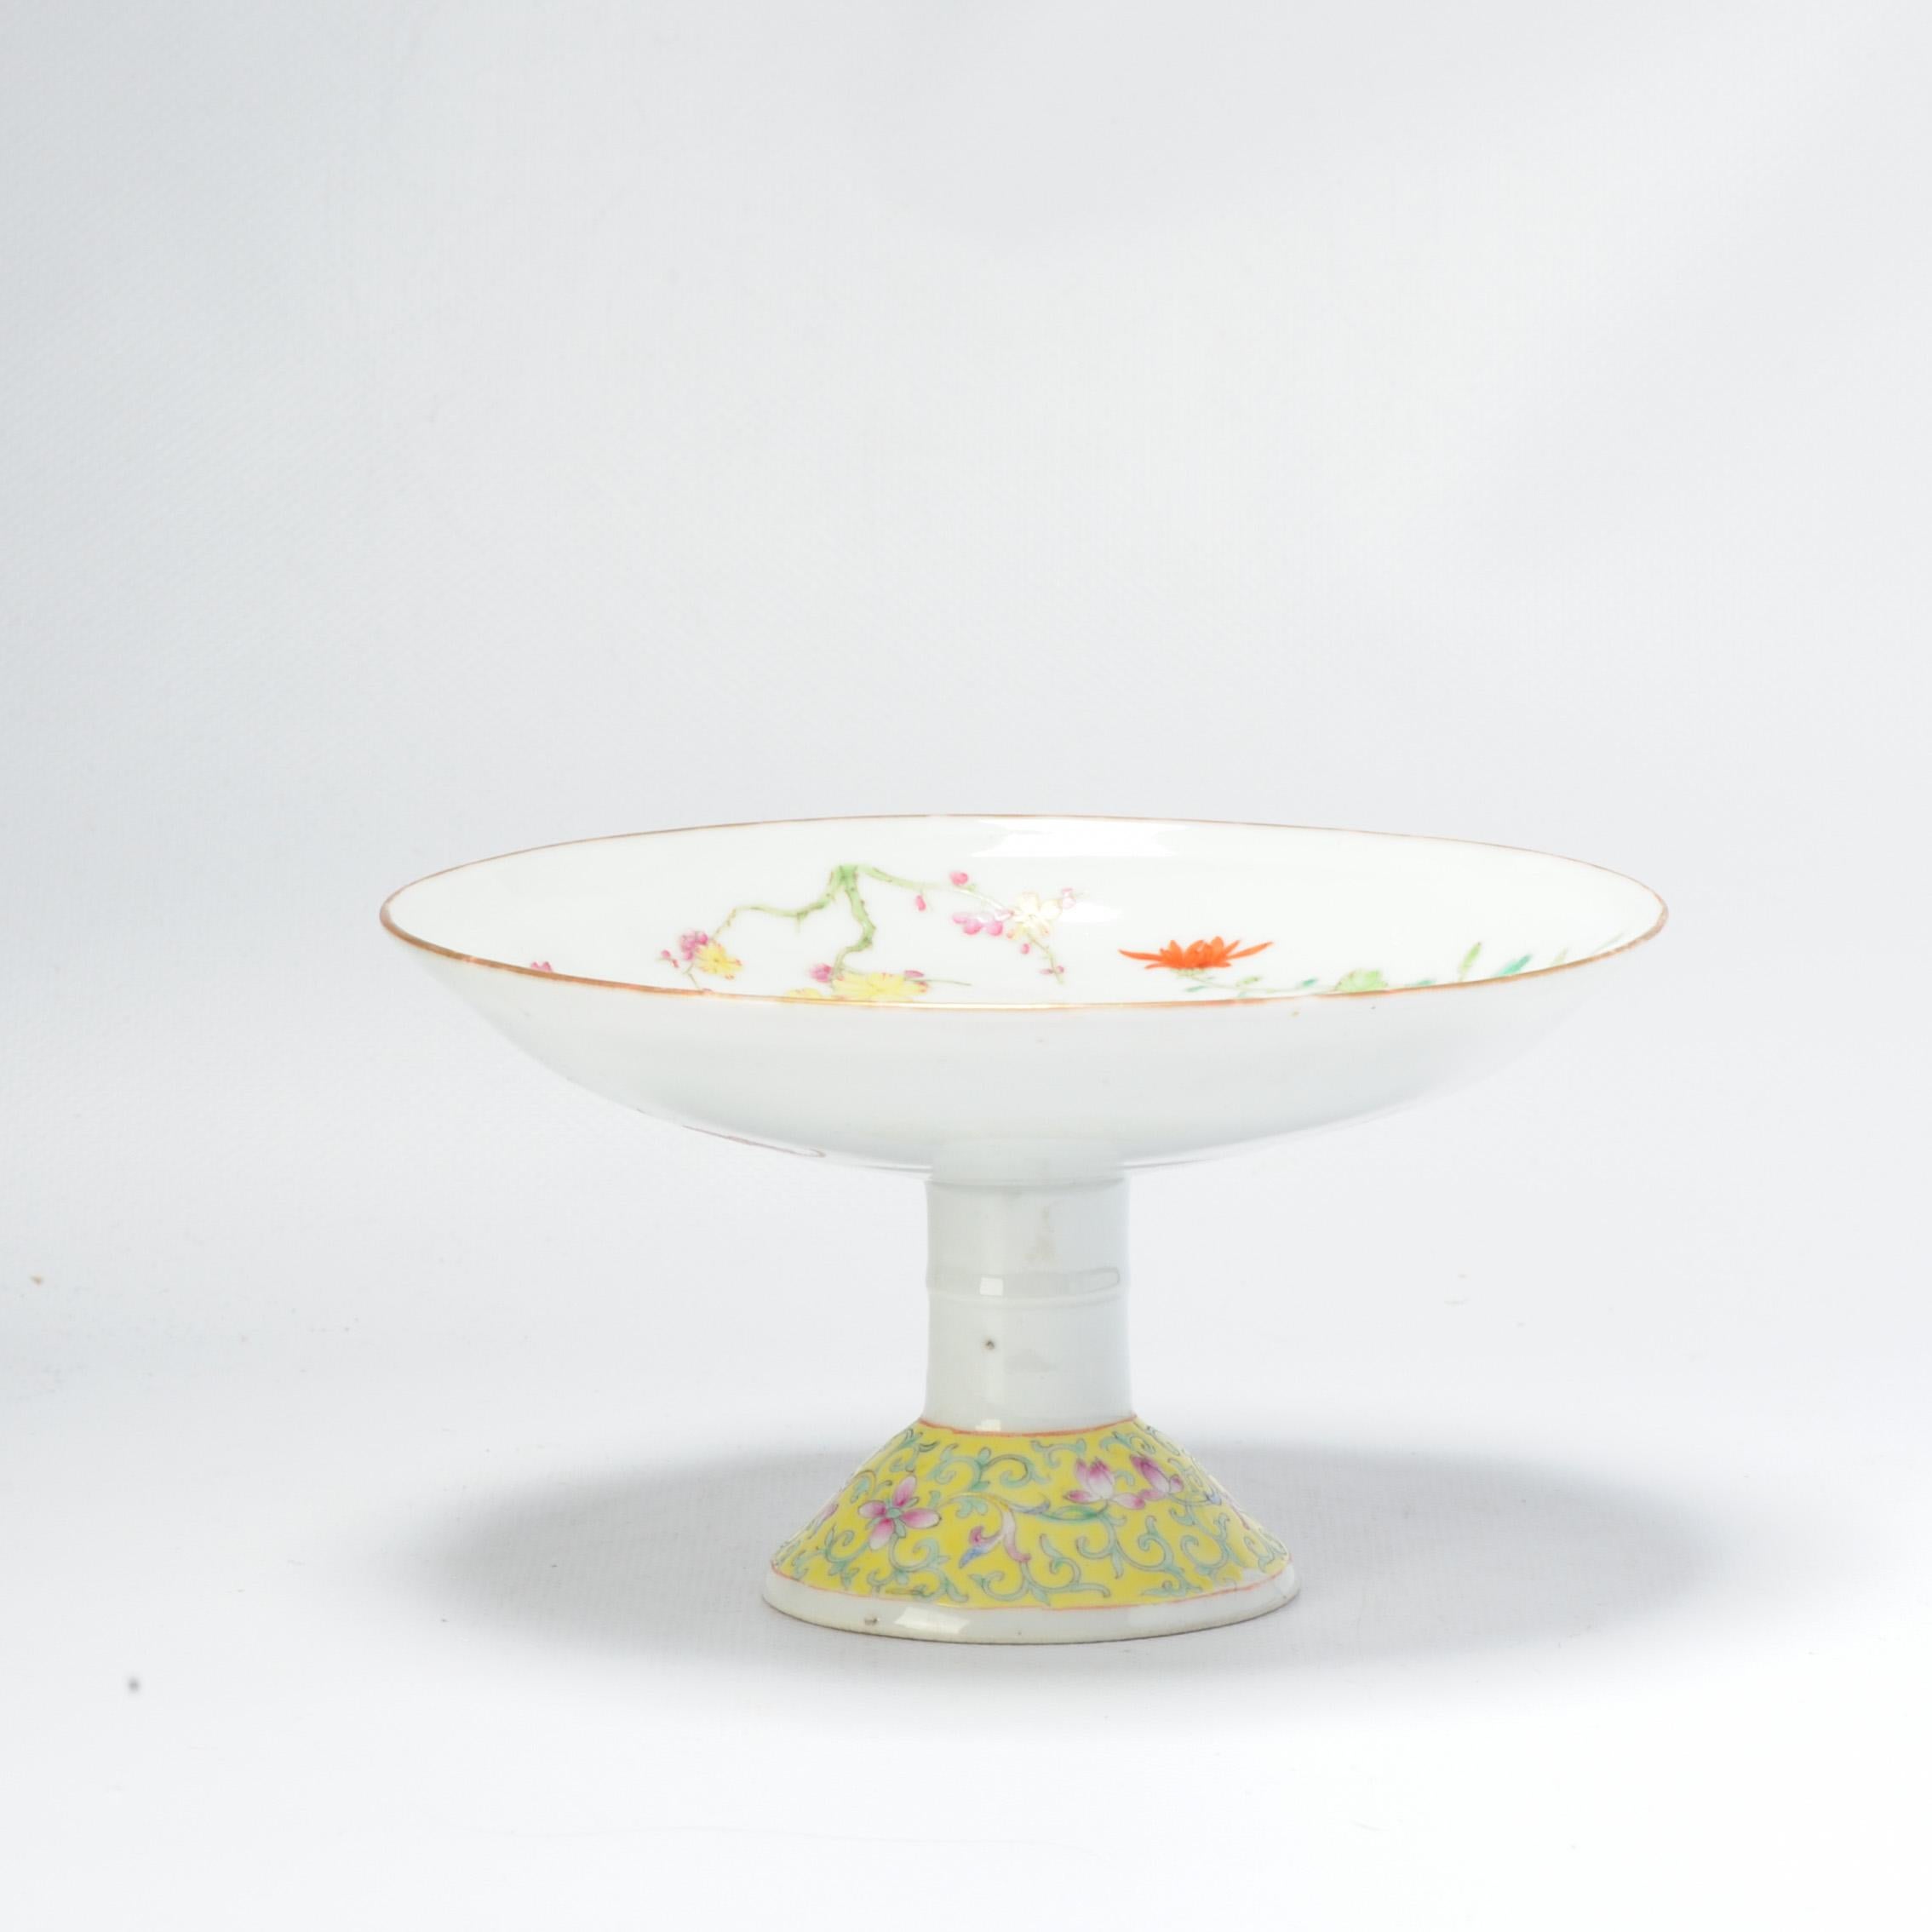 Lovely Guangxu or minguo Tazza piece, great quality. Decorated with various kind of flowers (peony, lotus, chrysanthemum and prunus) in a famille rose palette. The underside has 3 nicely painted bats.

Additional information:
Material: Porcelain &